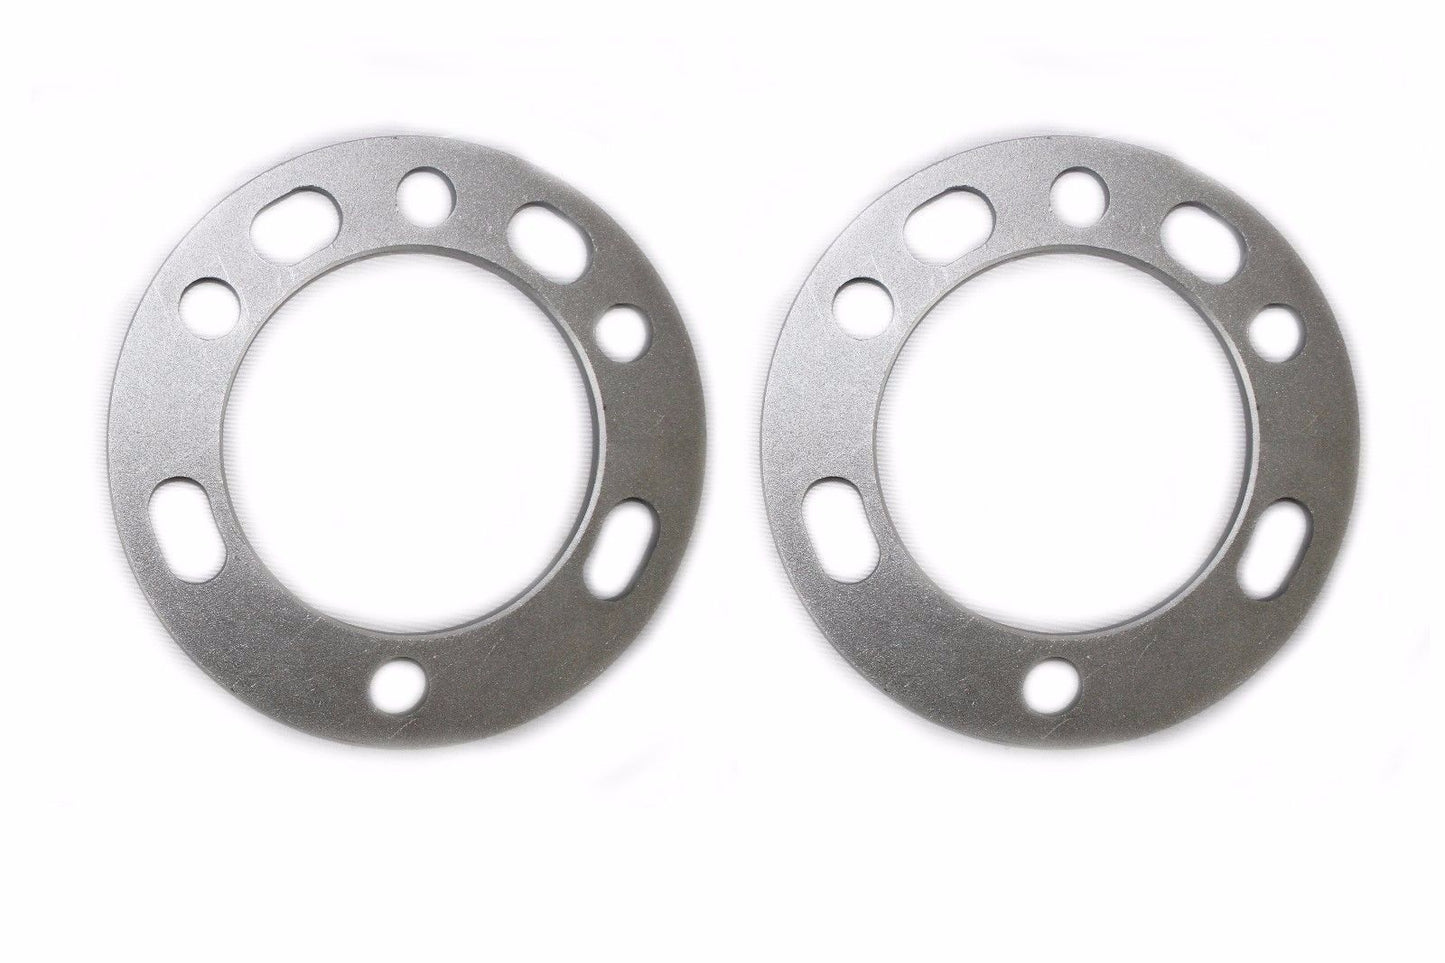 5X5 (2 Pieces) Wheel Spacers, Thickness 5mm thick 50 studs, OD 170mm ID 110mm